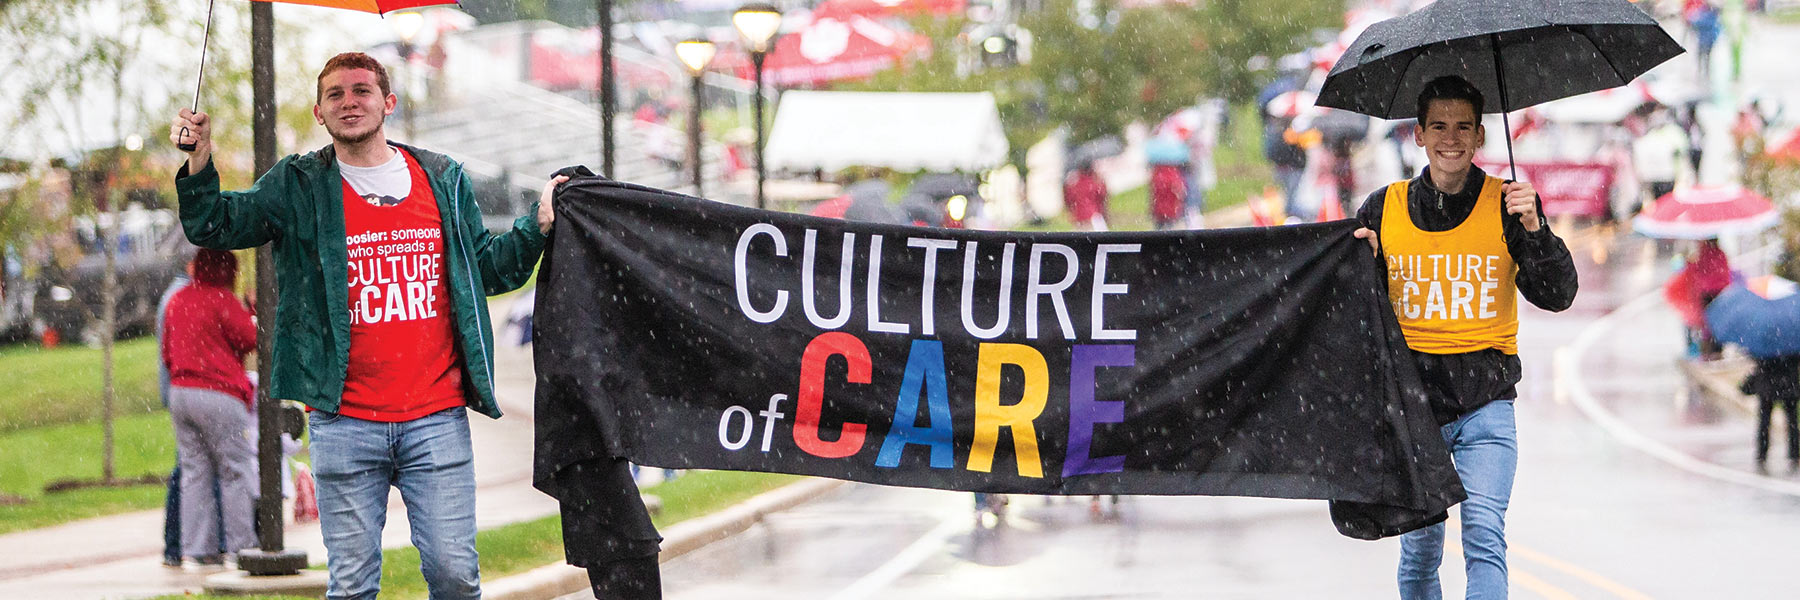 students walking  in a rainy parade, holding a banner that says culture of care